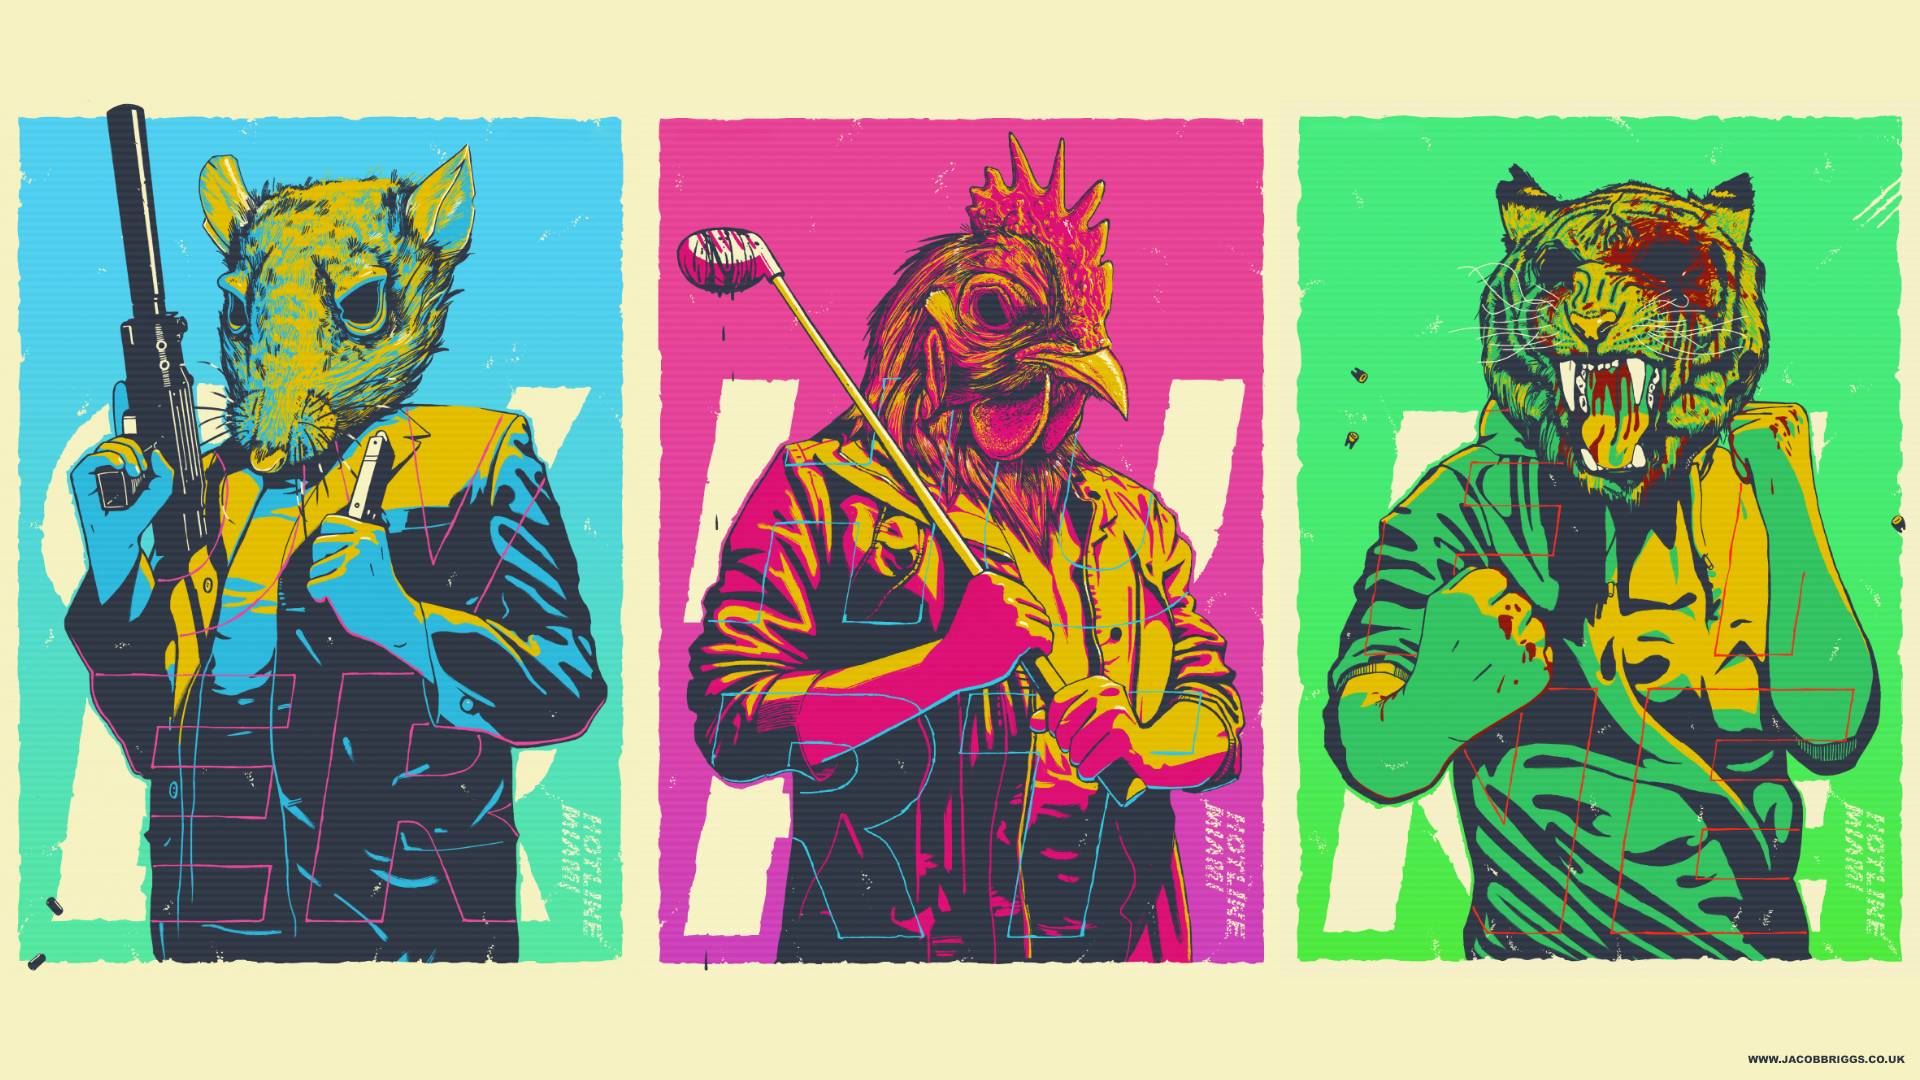 Video Game Hotline Miami HD Wallpaper | Background Image